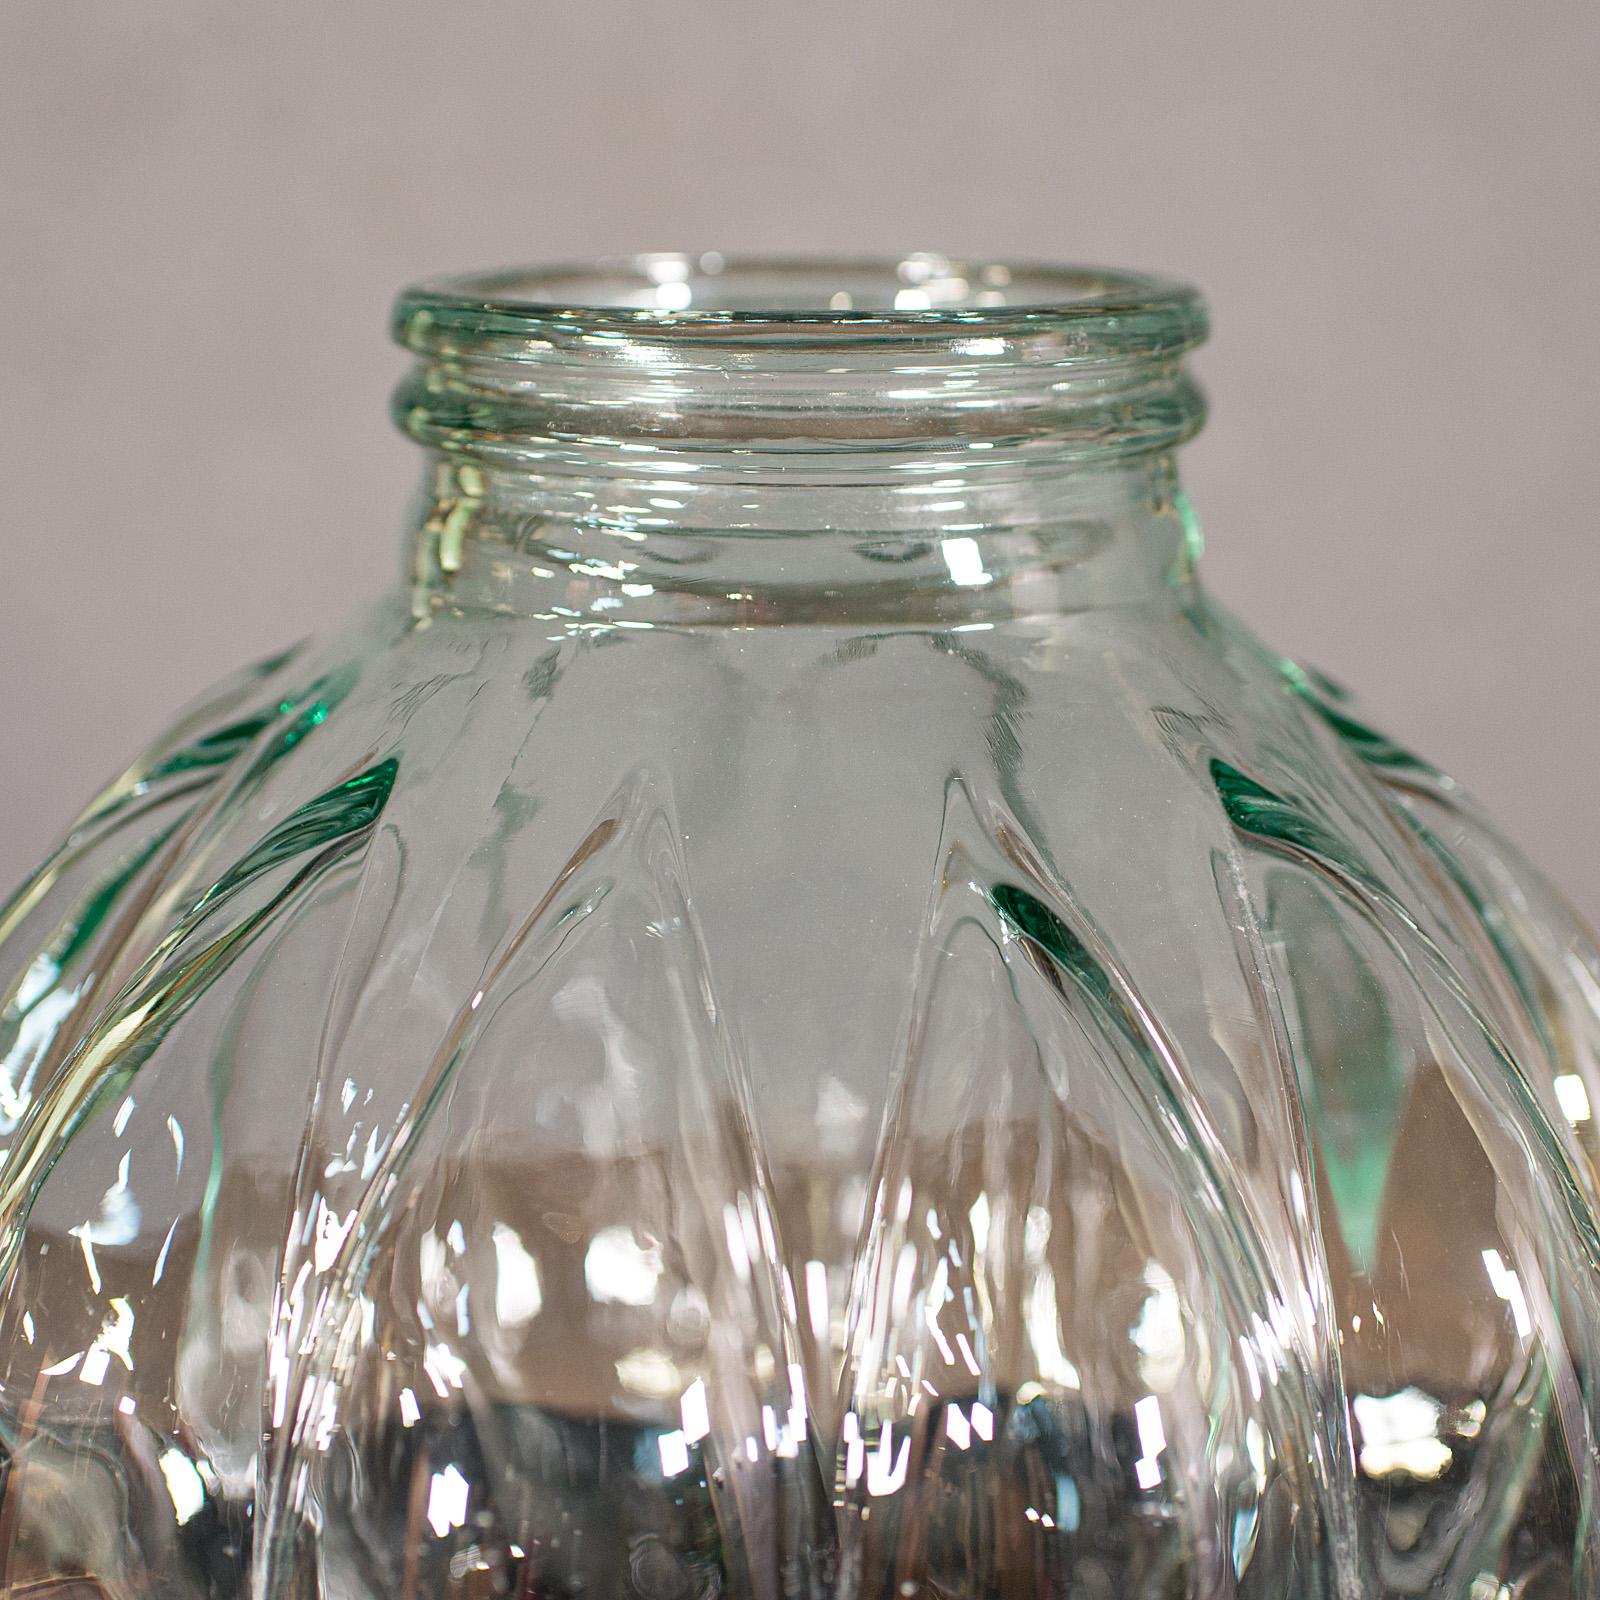 Large Vintage Carboy, English, Decorative, Glass, Storage Jar, Late 20th Century In Good Condition For Sale In Hele, Devon, GB